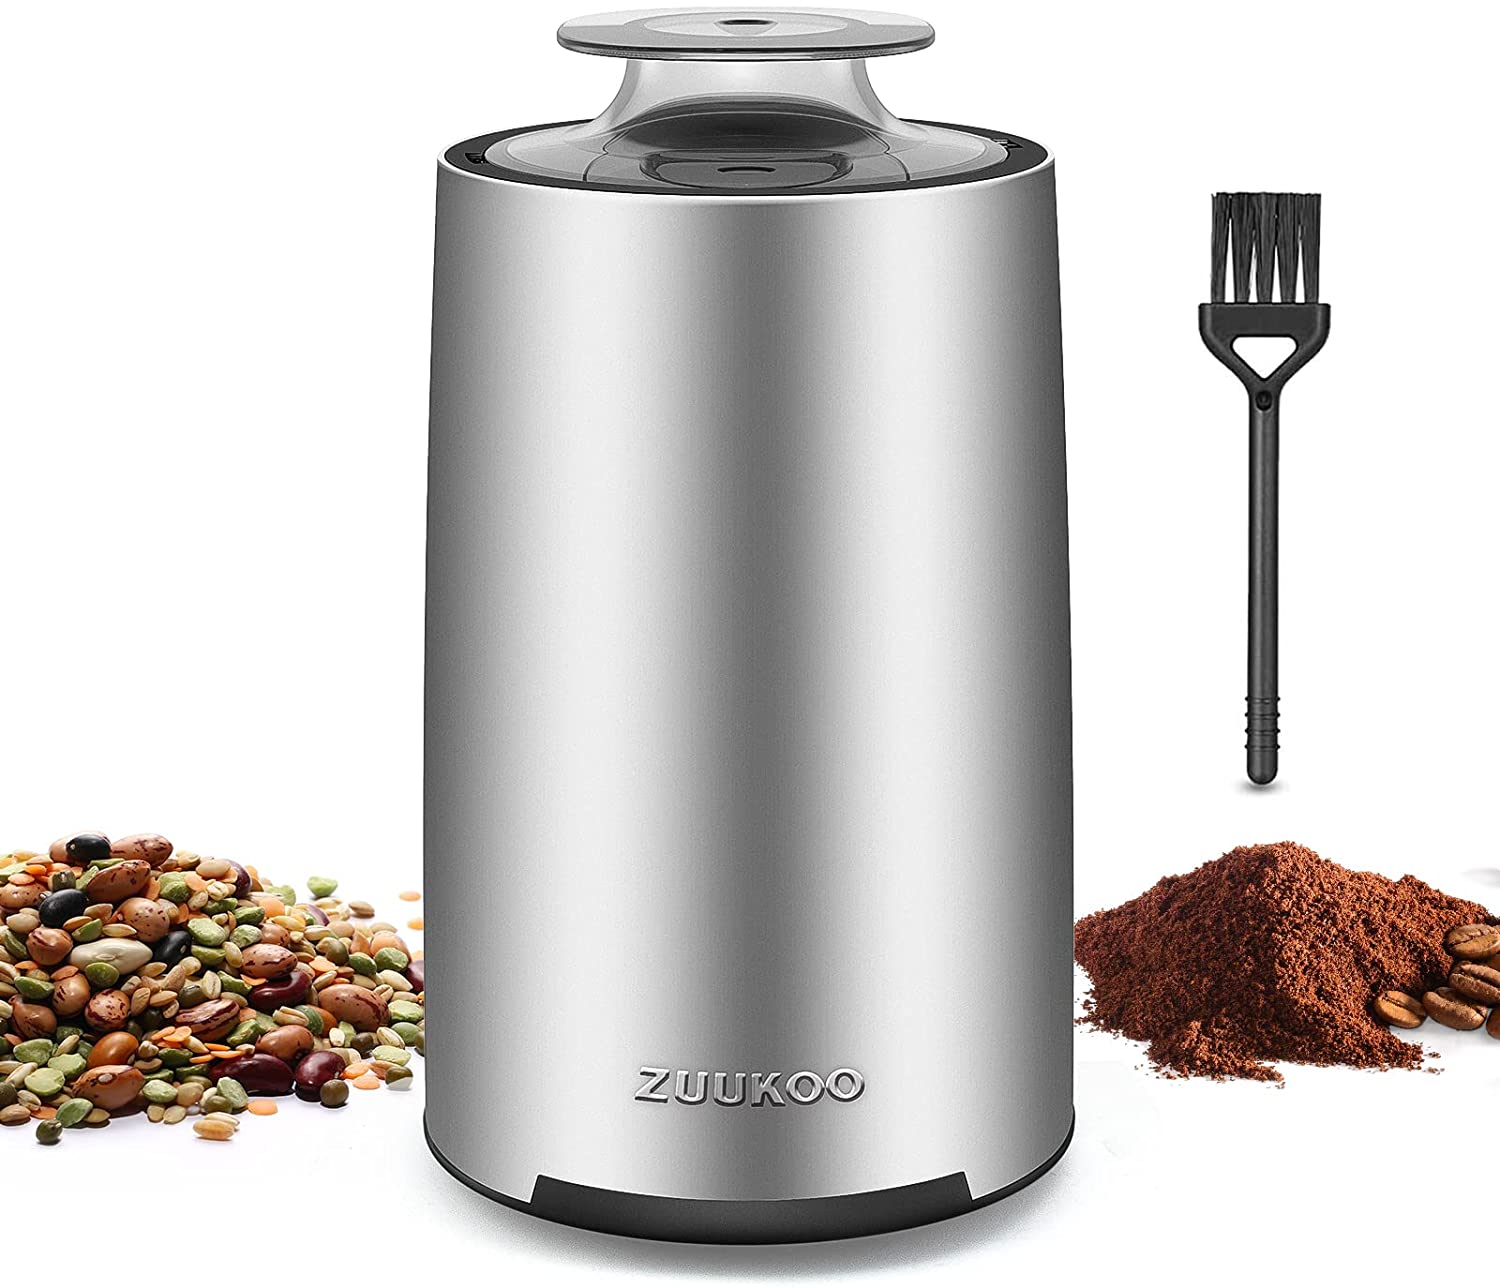 ZUUKOO Electric Coffee Grinder, Automatic Spice Mill, 200 W Spice and Coffee Mill with 70 g Capacity, Stainless Steel Sharp Blade, Grinder for Cereals, Pesto, Spices, Nuts, Sugar